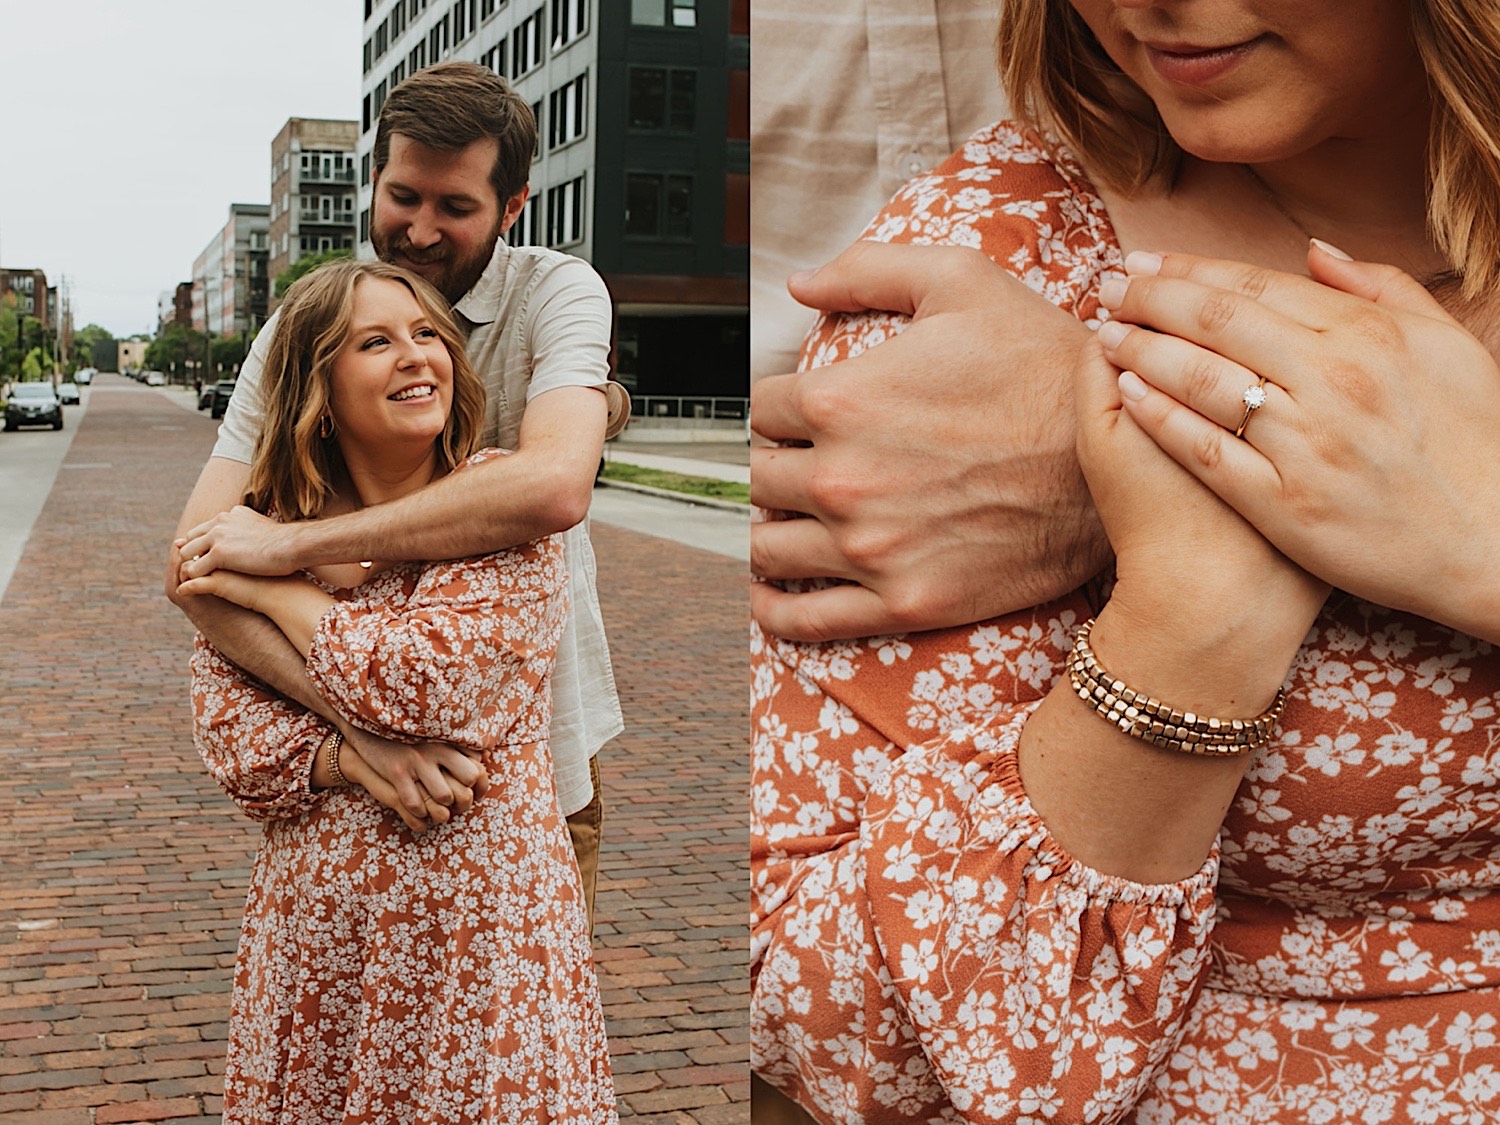 2 photos side by side, the left is of a man hugging a woman from behind as she smiles at him, the right is a close up of the woman's hand showing off her engagement ring